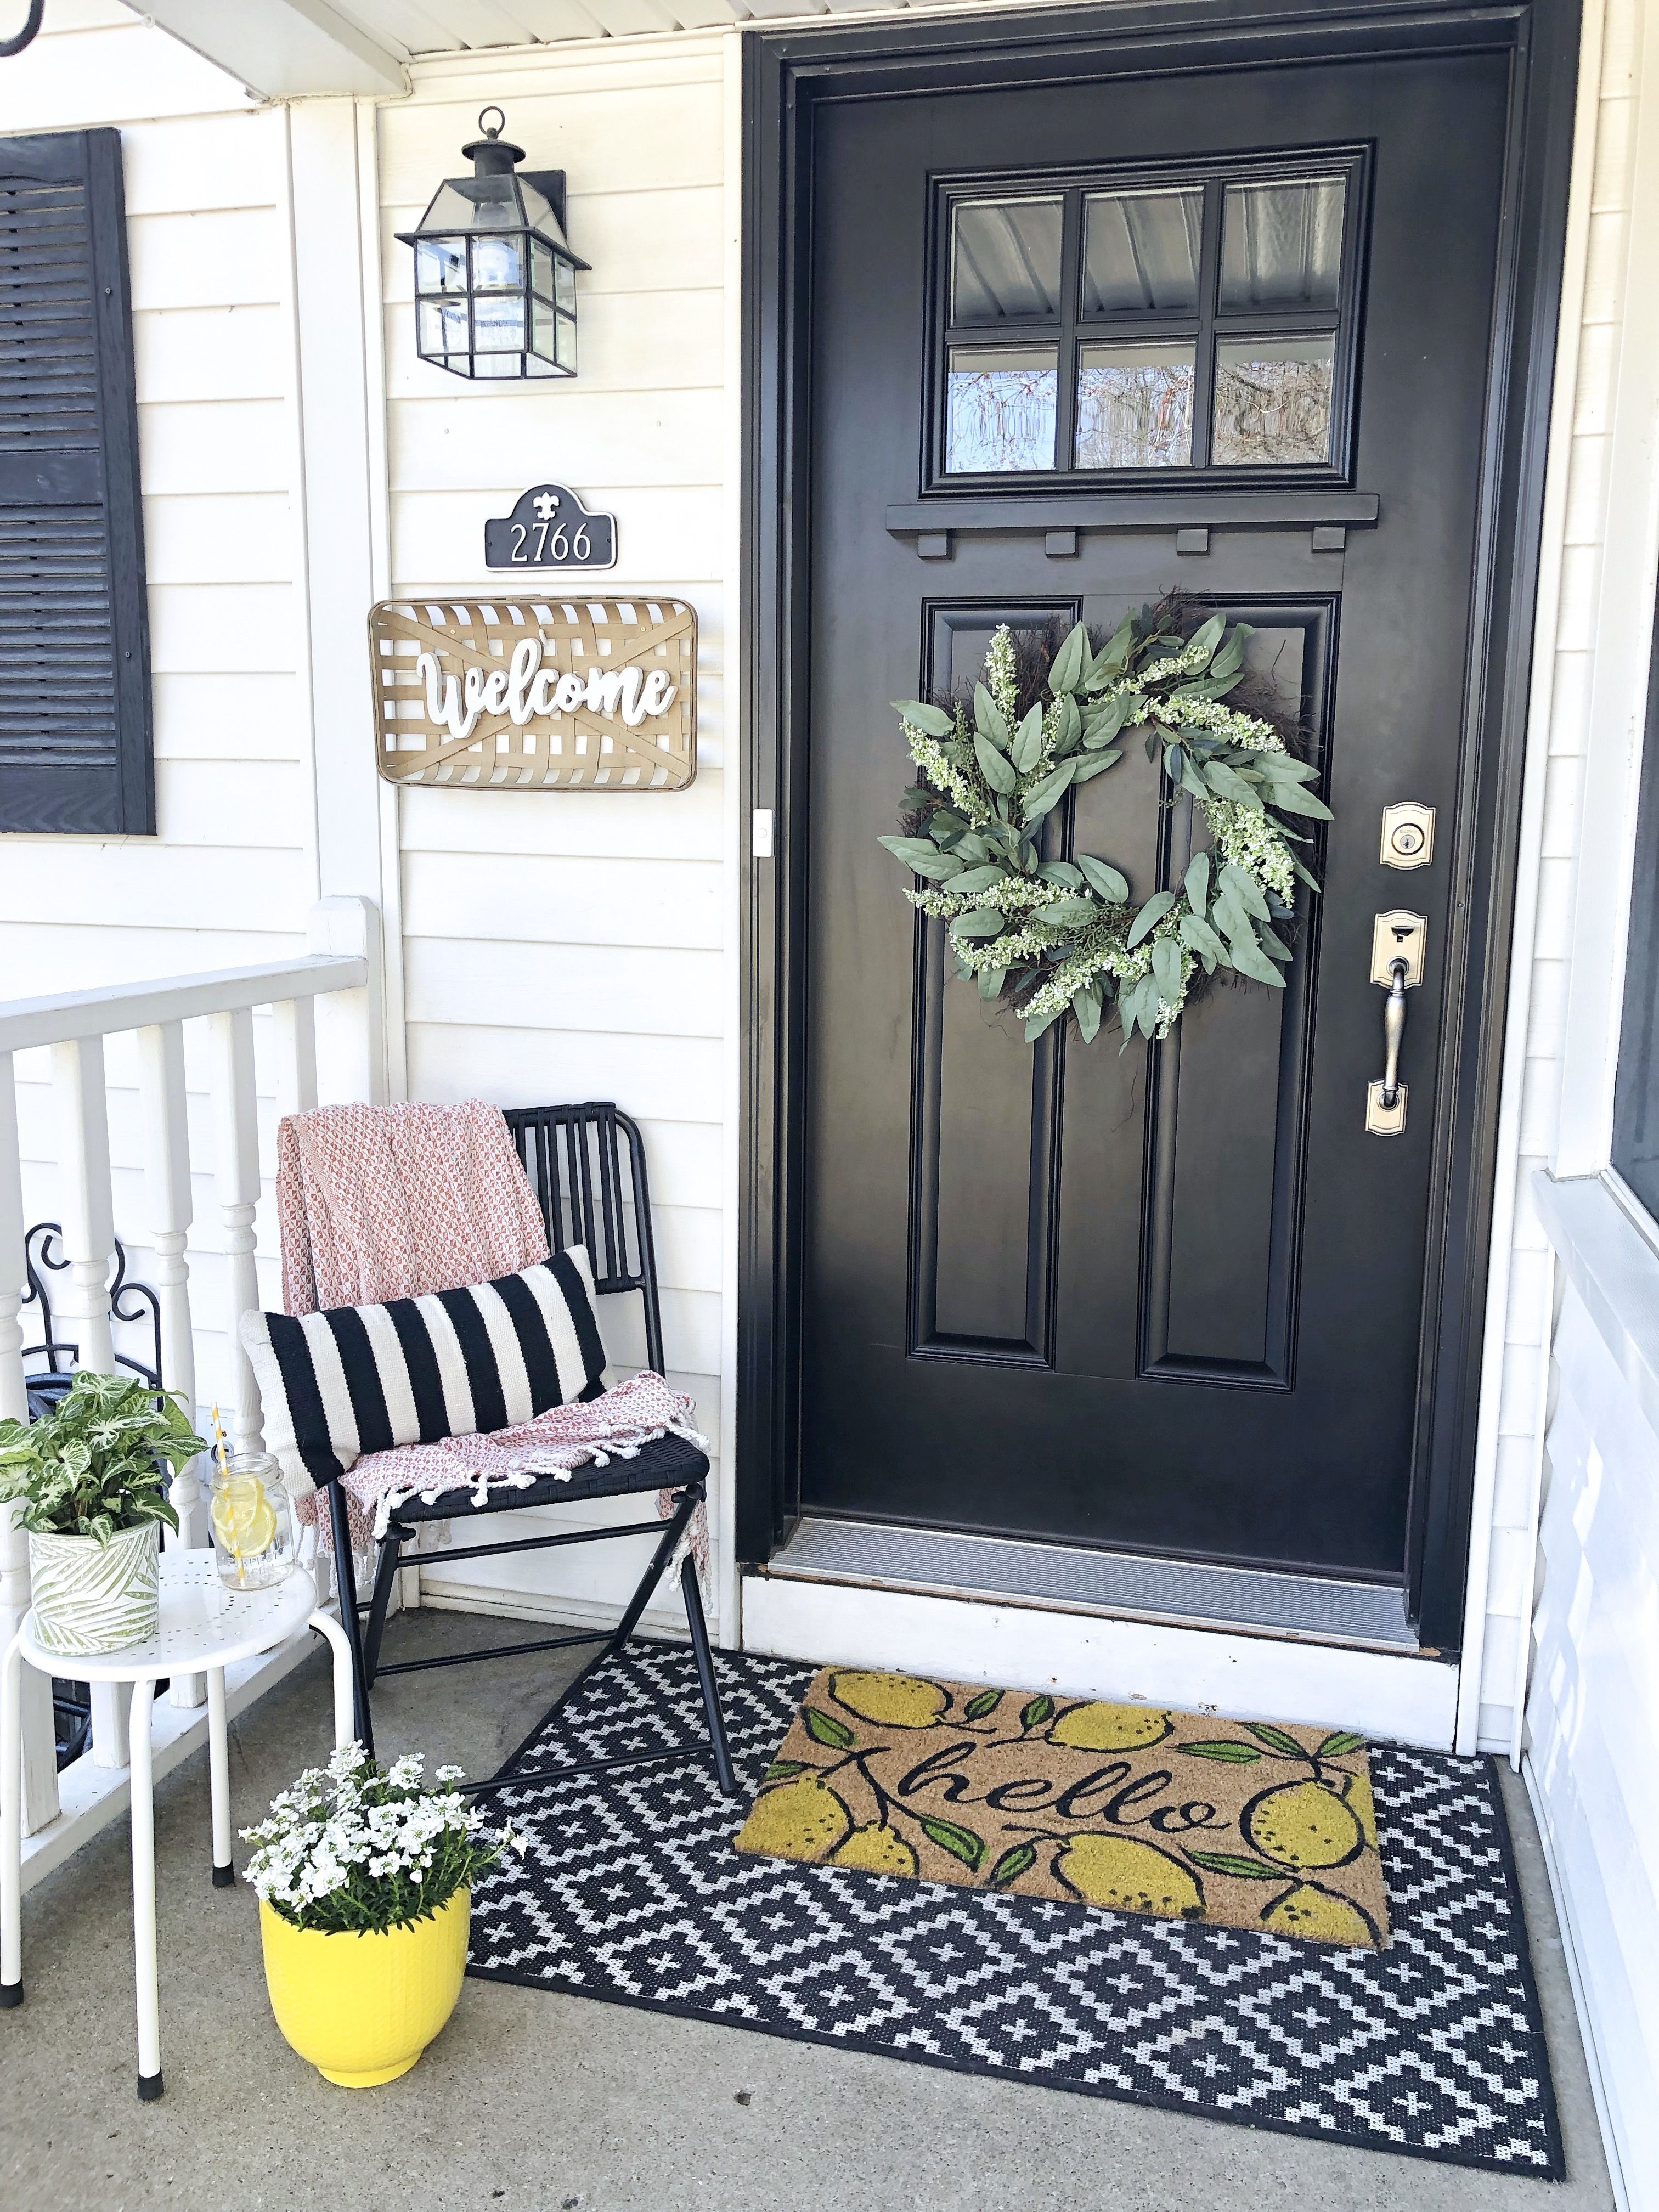 Spring Small Front Porch Decor: 7 Budget Friendly Decorating Ideas - Coffee, Pancakes & Dreams -   17 plants Small porches ideas